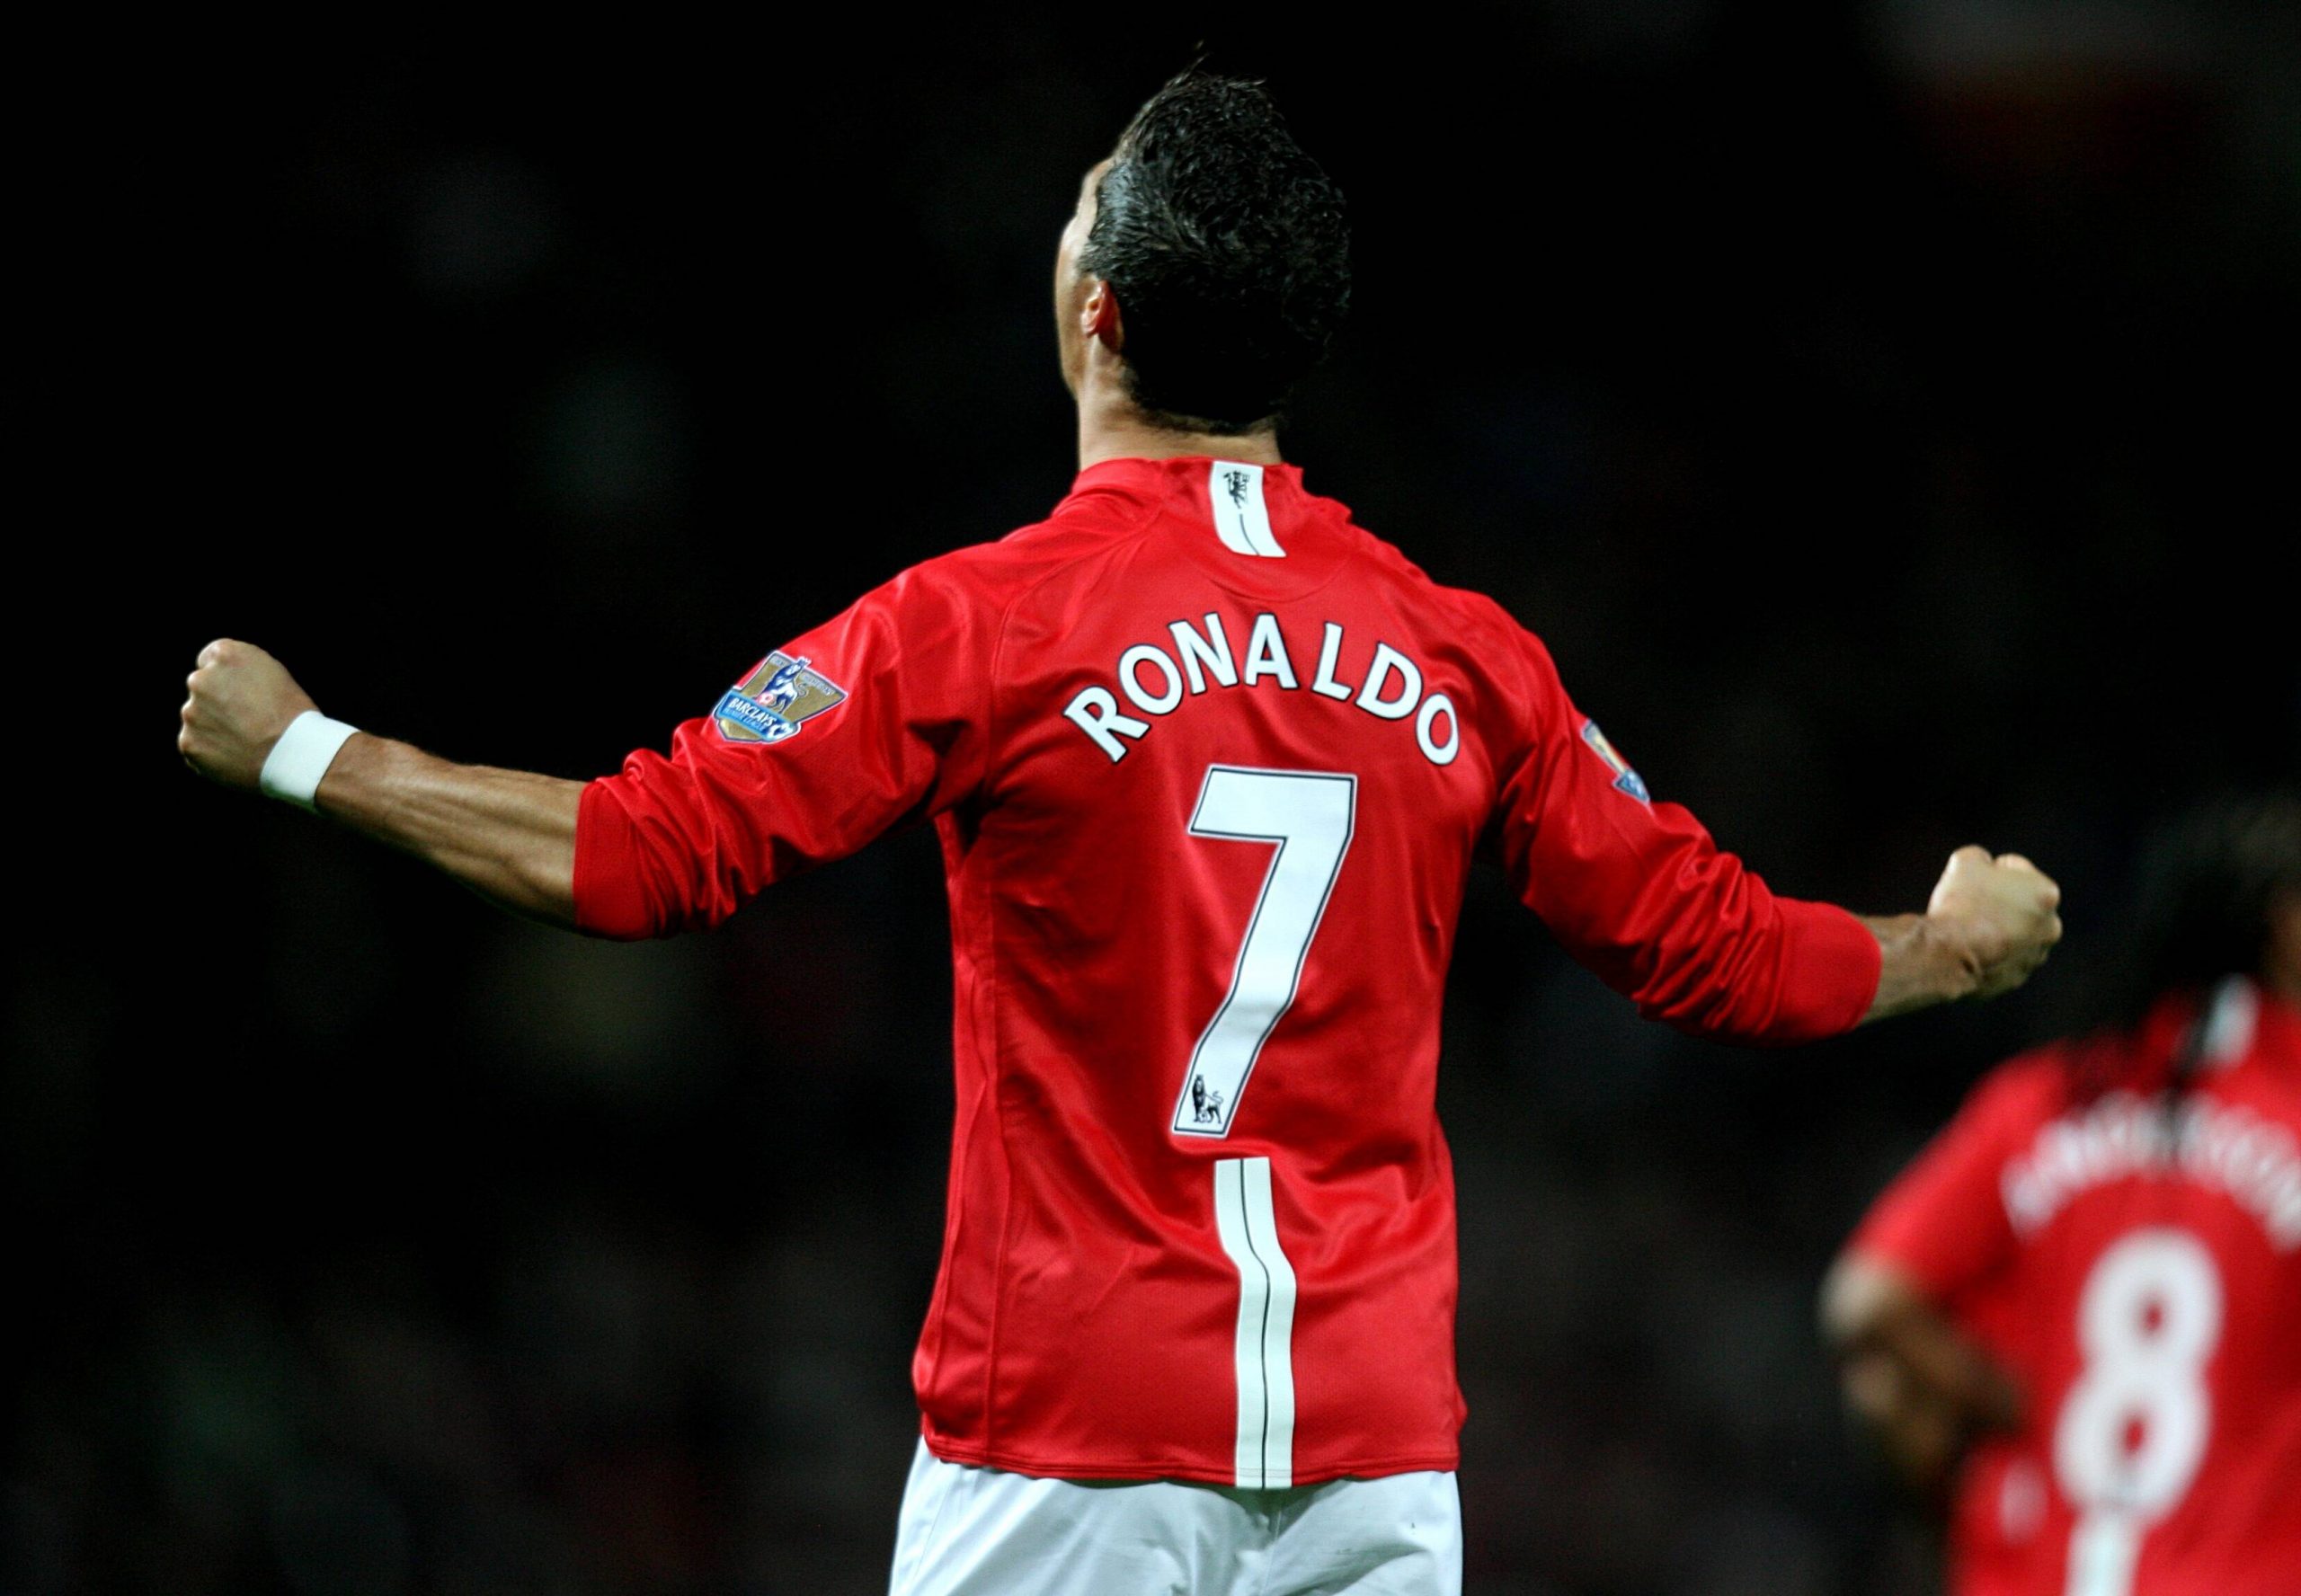 Cristiano Ronaldo wears the number 7 kit at Manchester United.